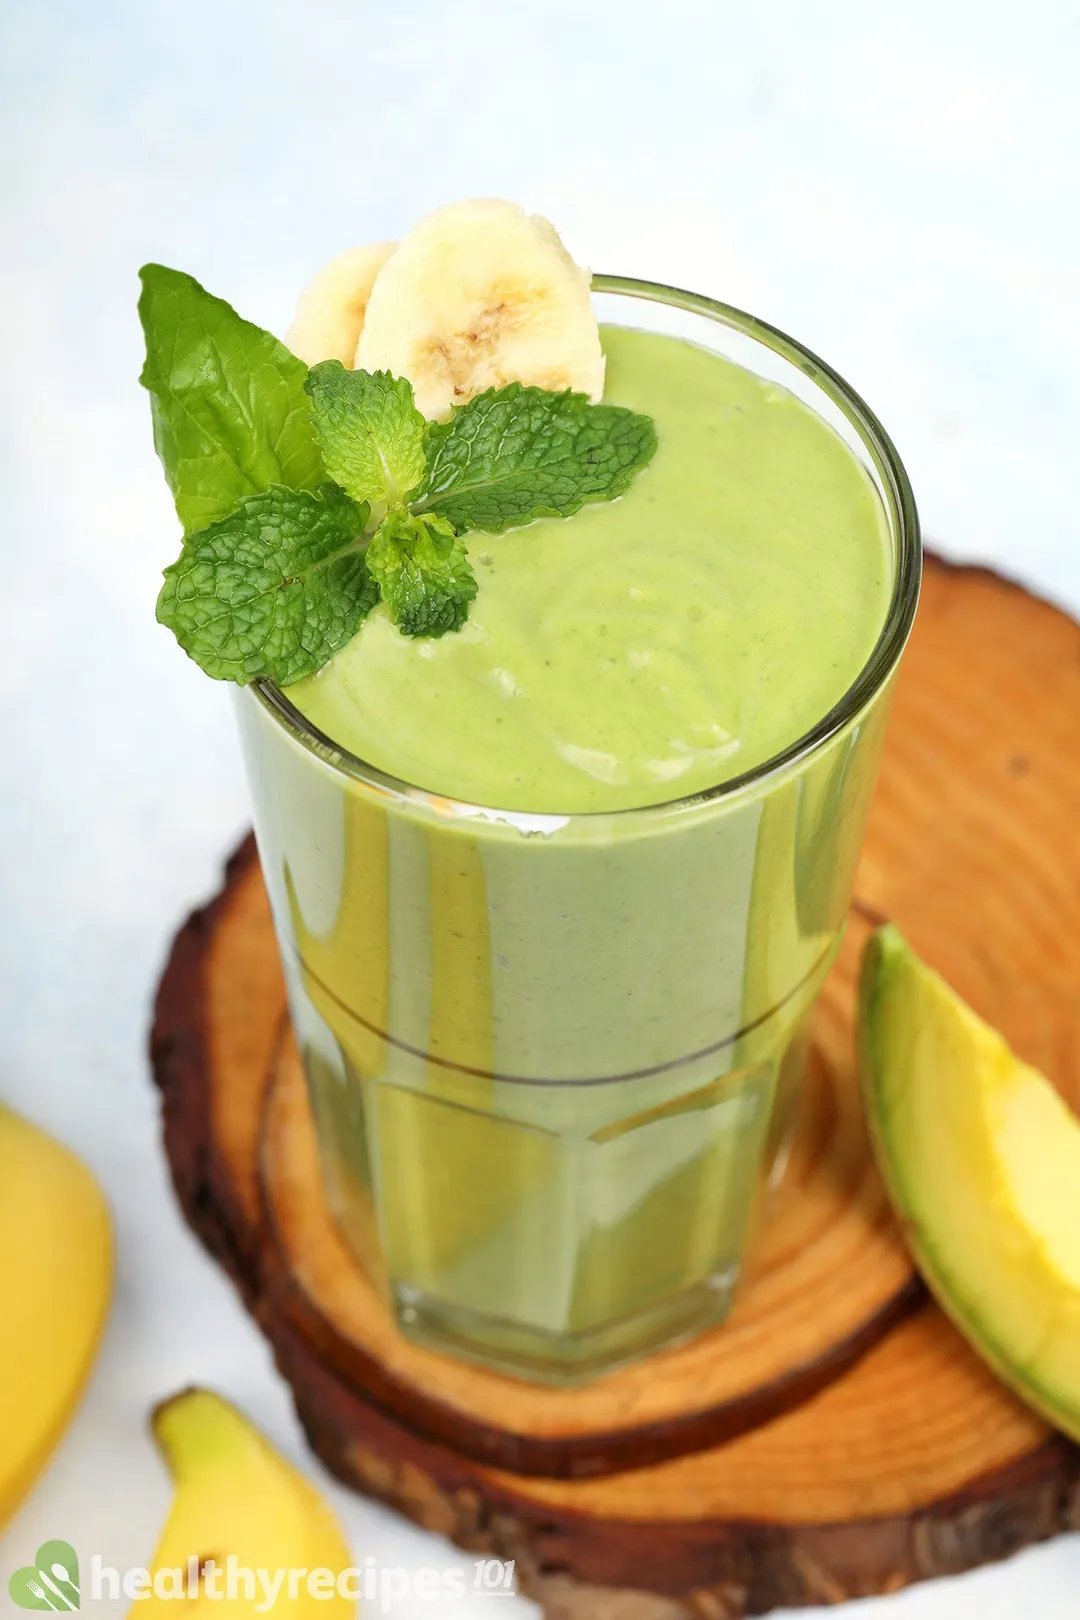 a glass of green smoothie on wooden tray with banana sliced and mint leaves on top